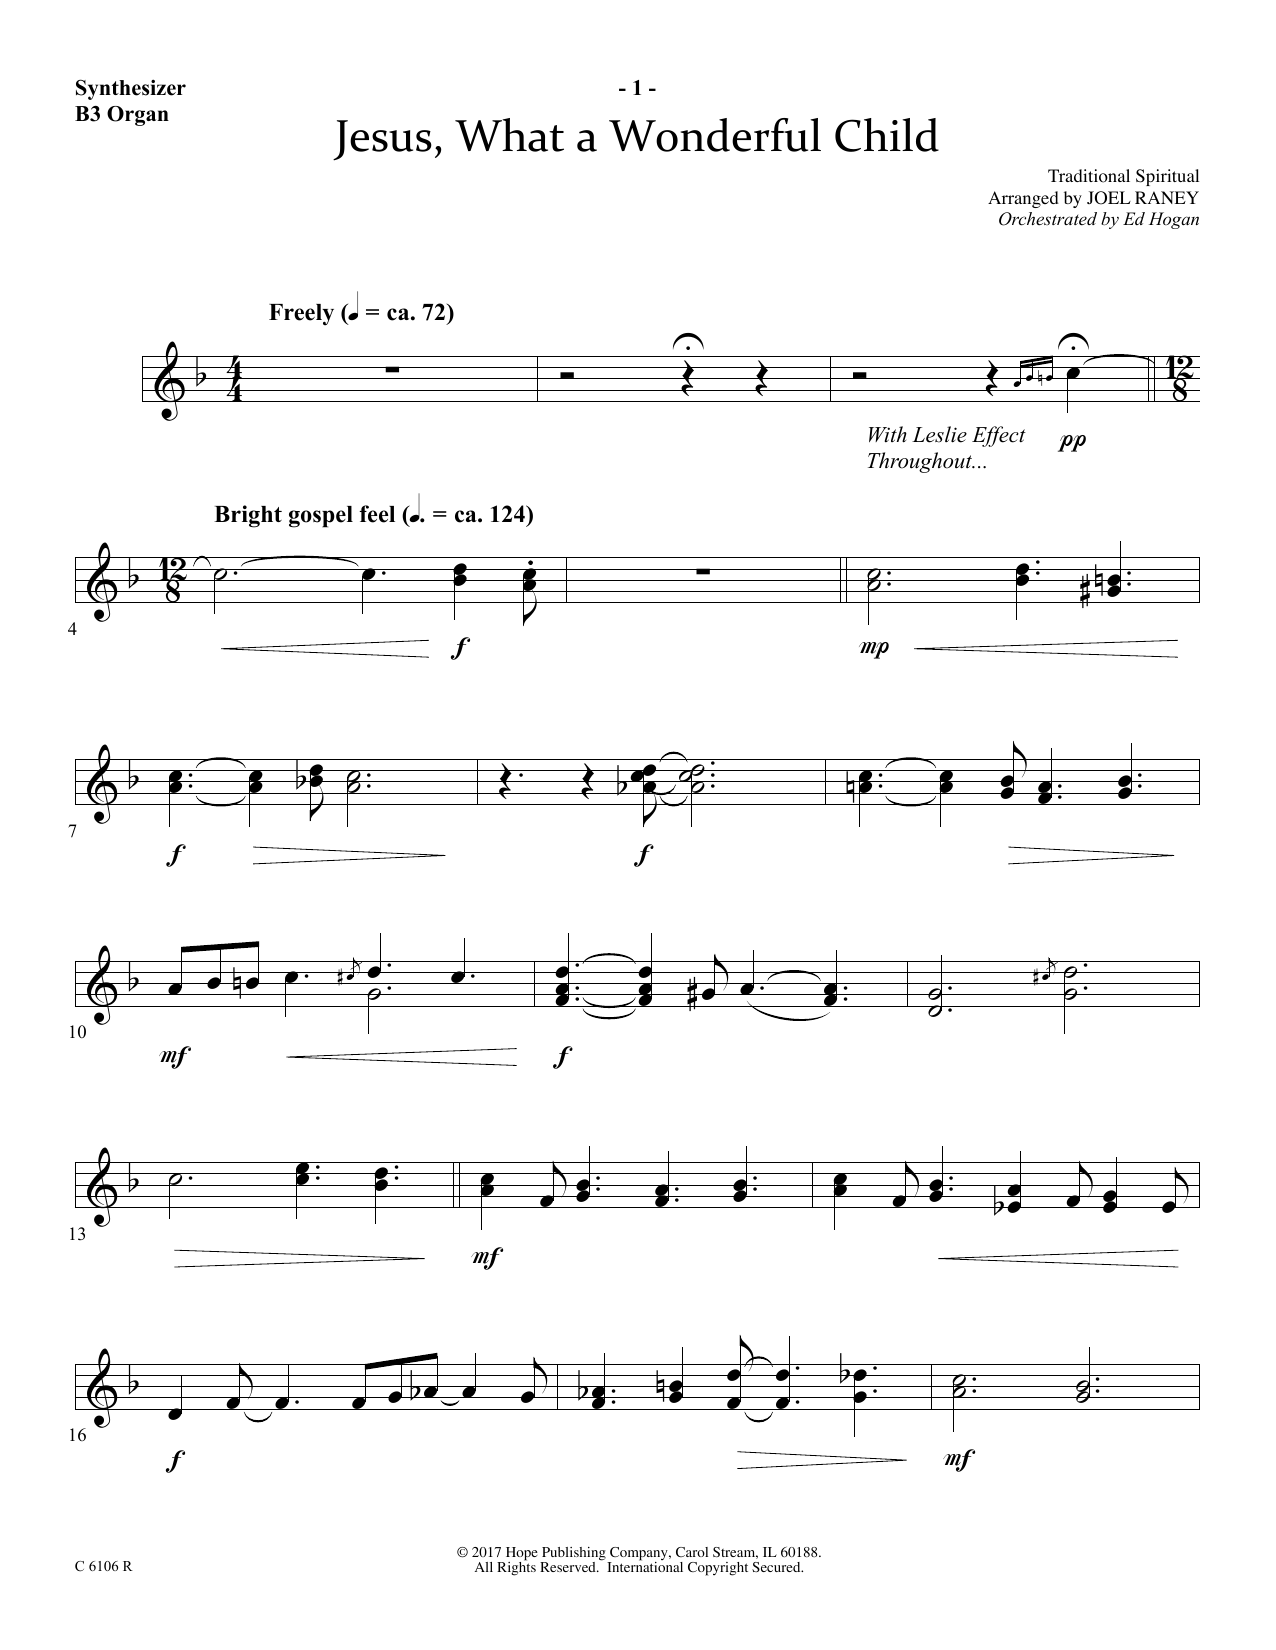 Download Joel Raney Jesus, What a Wonderful Child - Synthes Sheet Music